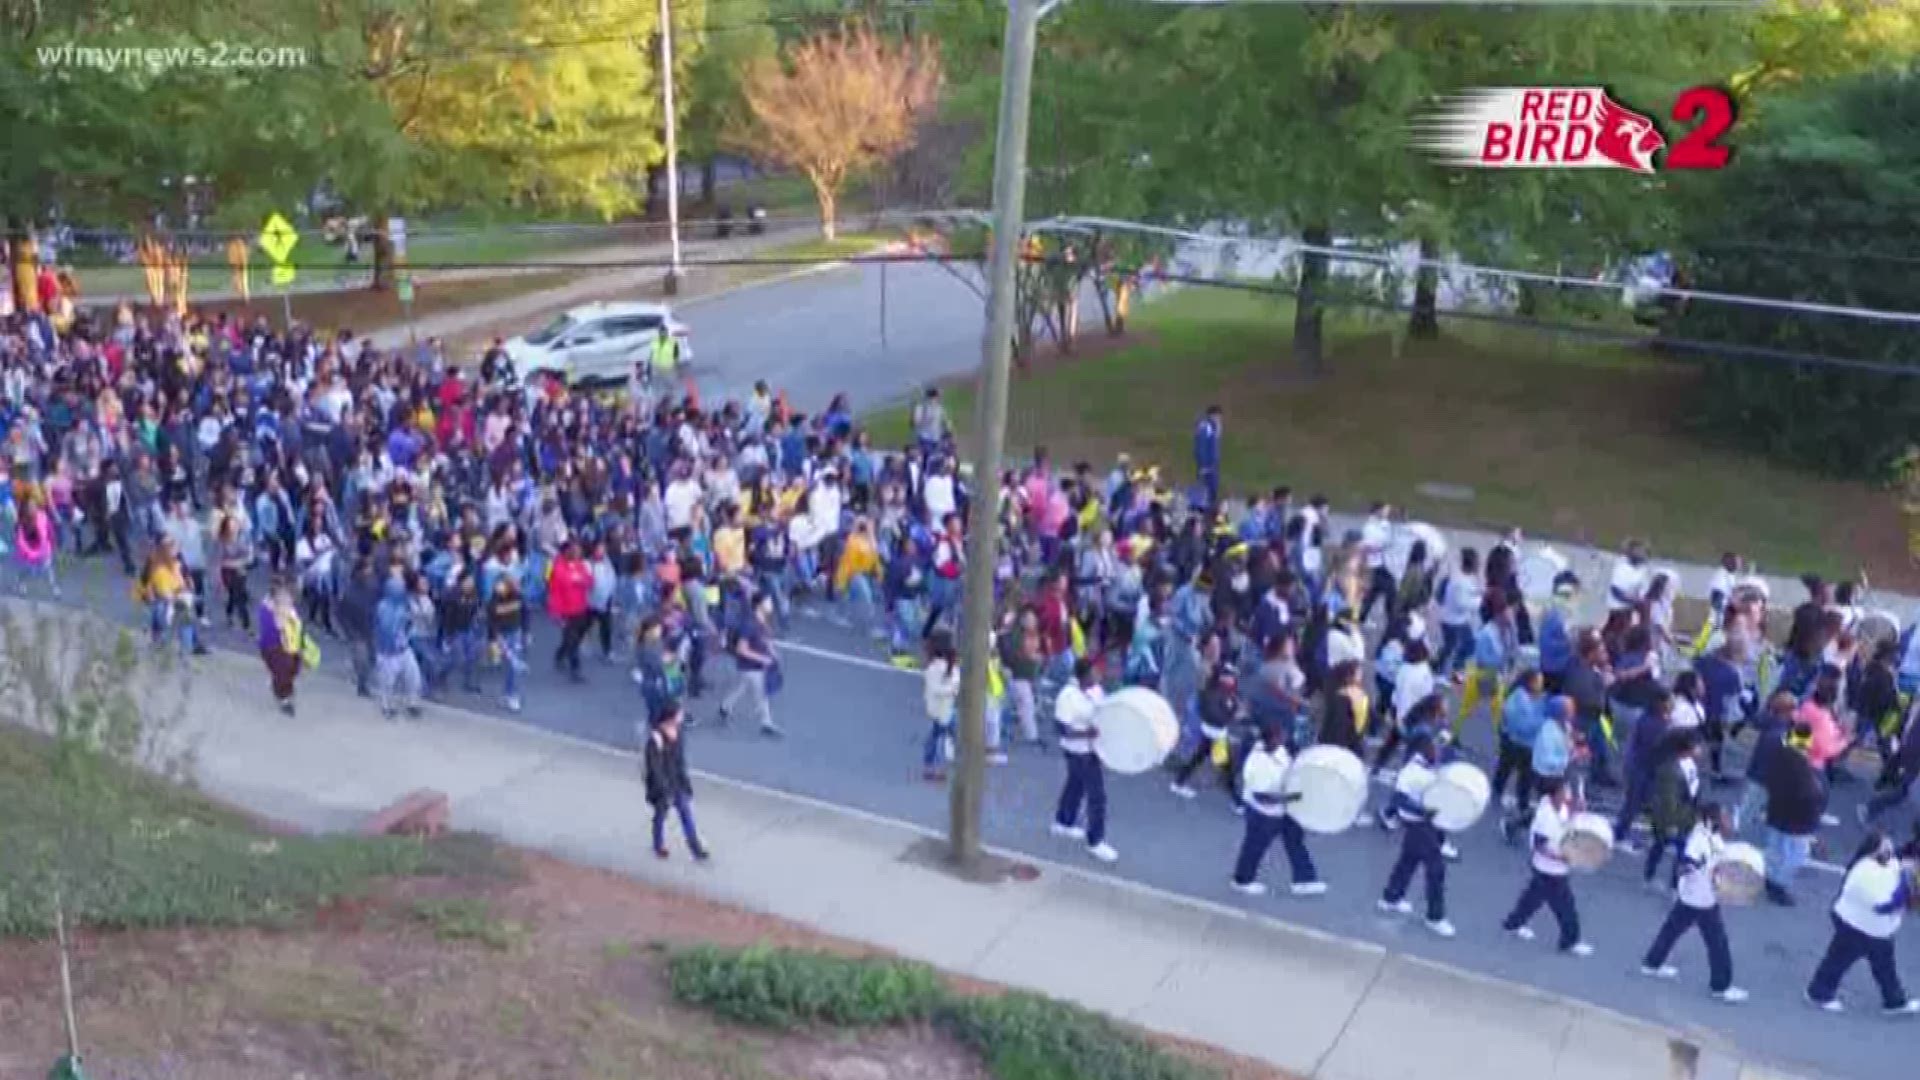 UNC Greensboro students, faculty, and staff walked from campus to the Greensboro Coliseum ahead of tonight’s men’s basketball season tip off game.